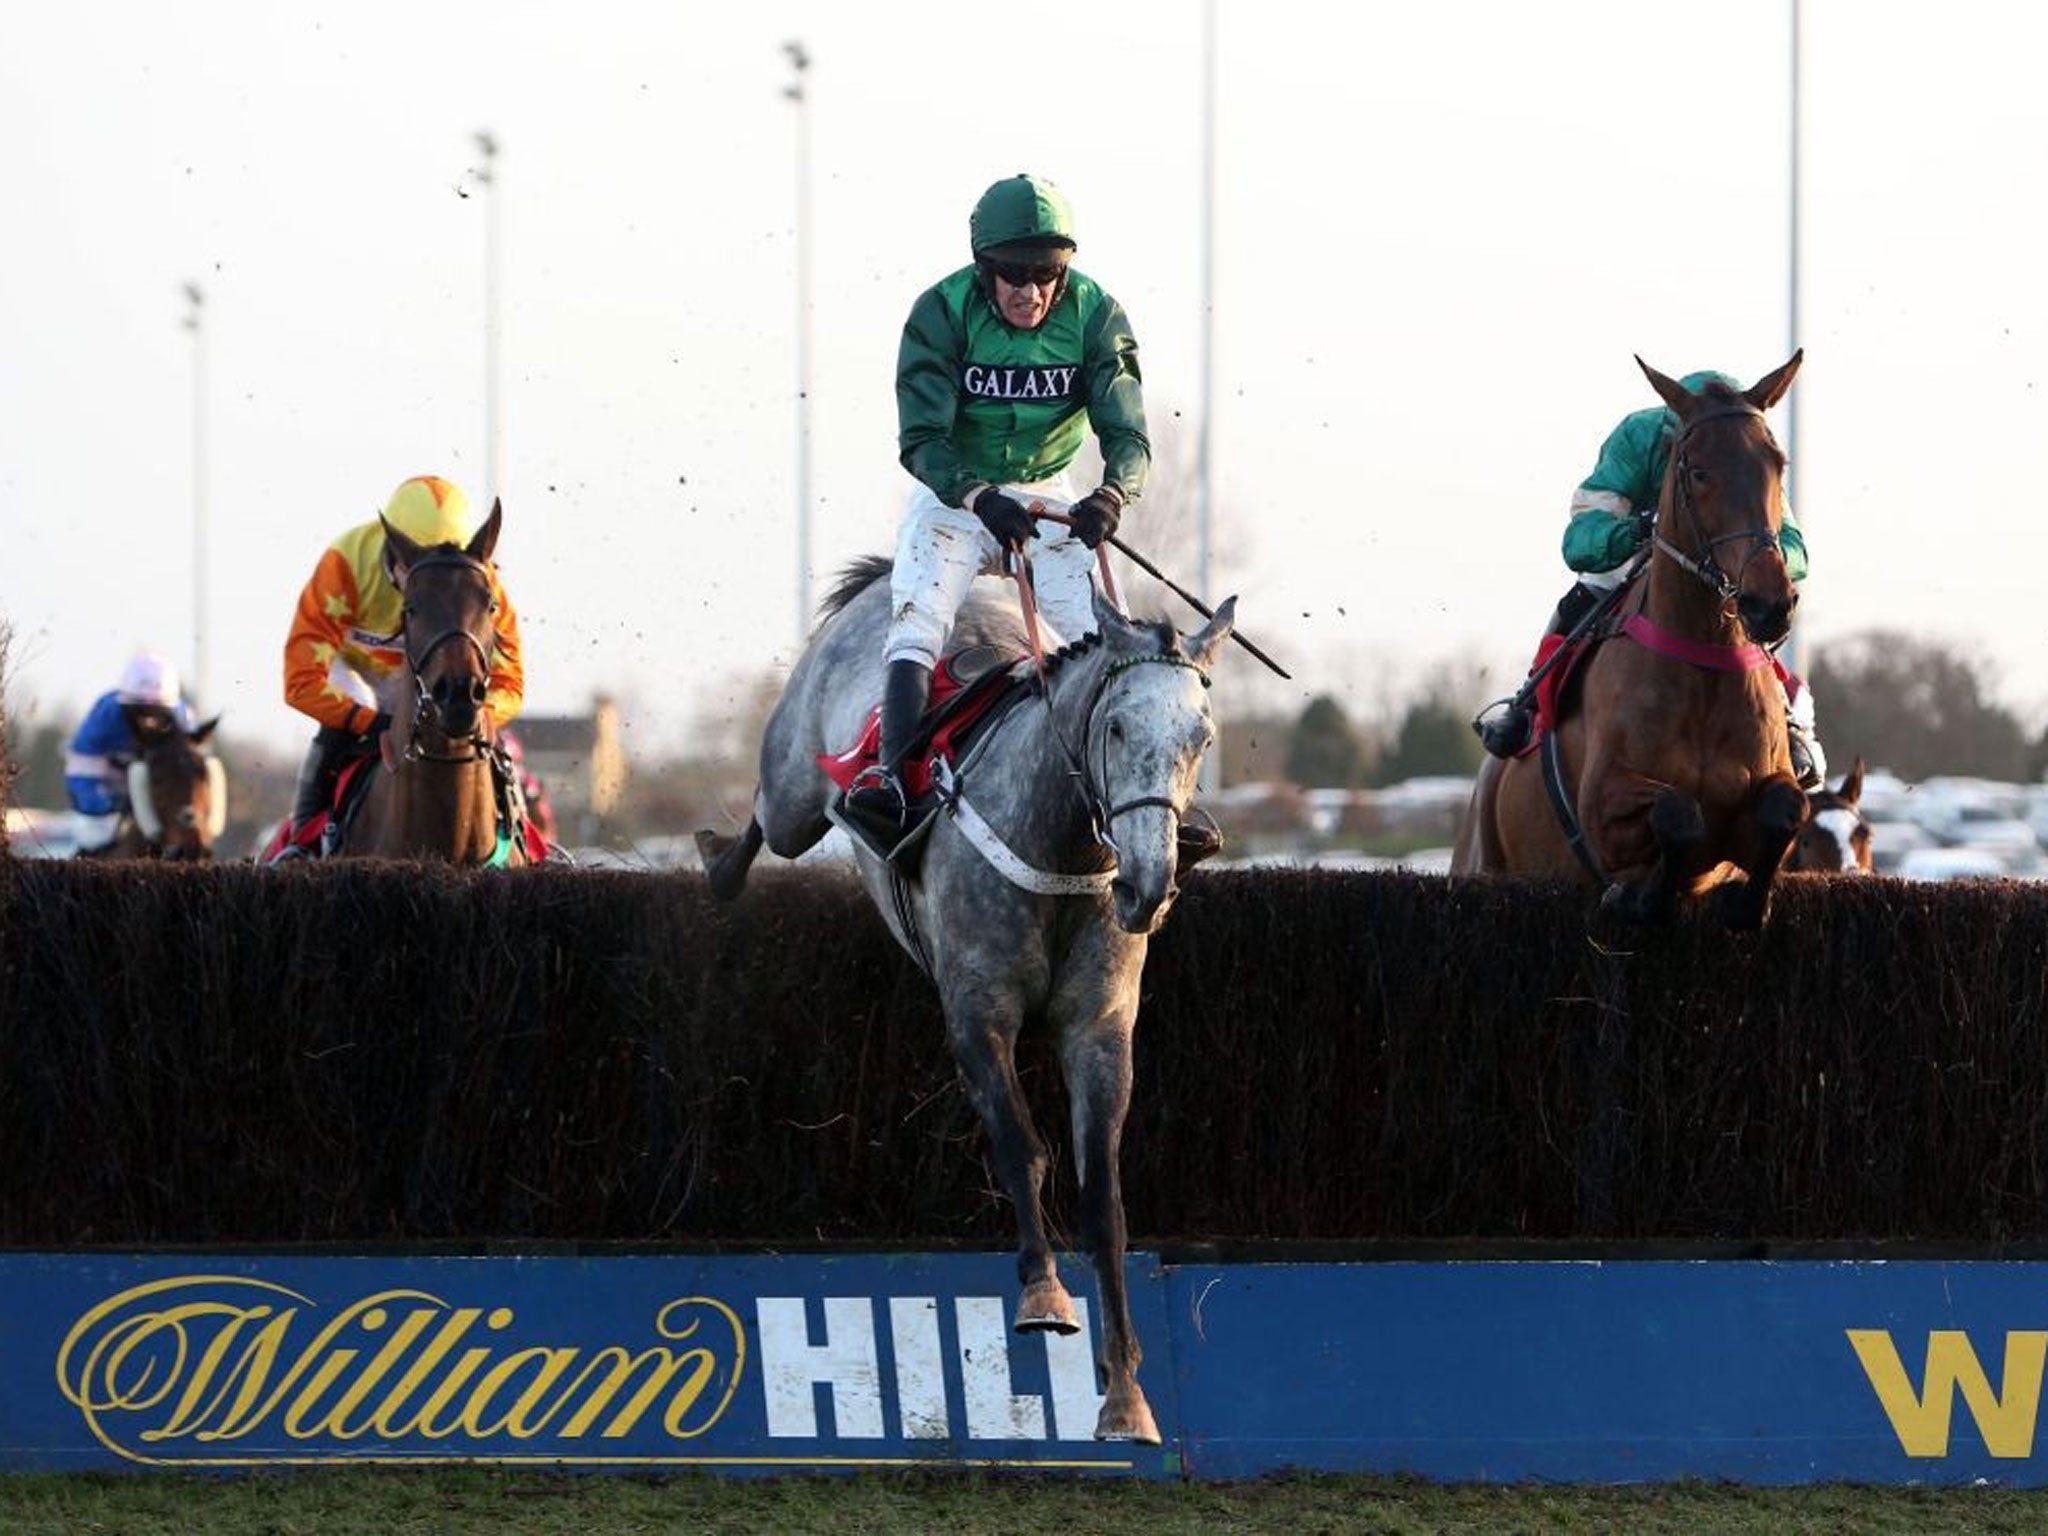 William Hill has some tough fences to jump after abandoning Amaya merger plans